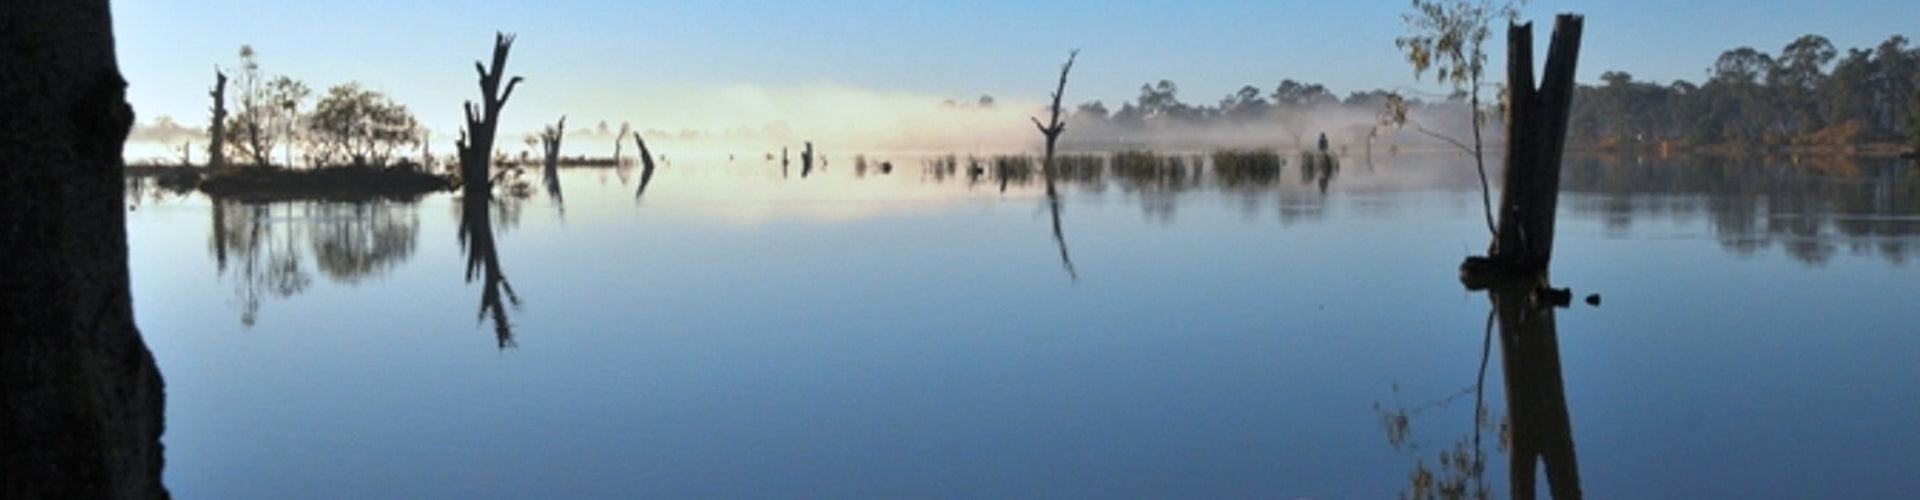 Nagambie Lakes in the Goulburn Valley Wine Region of Victoria